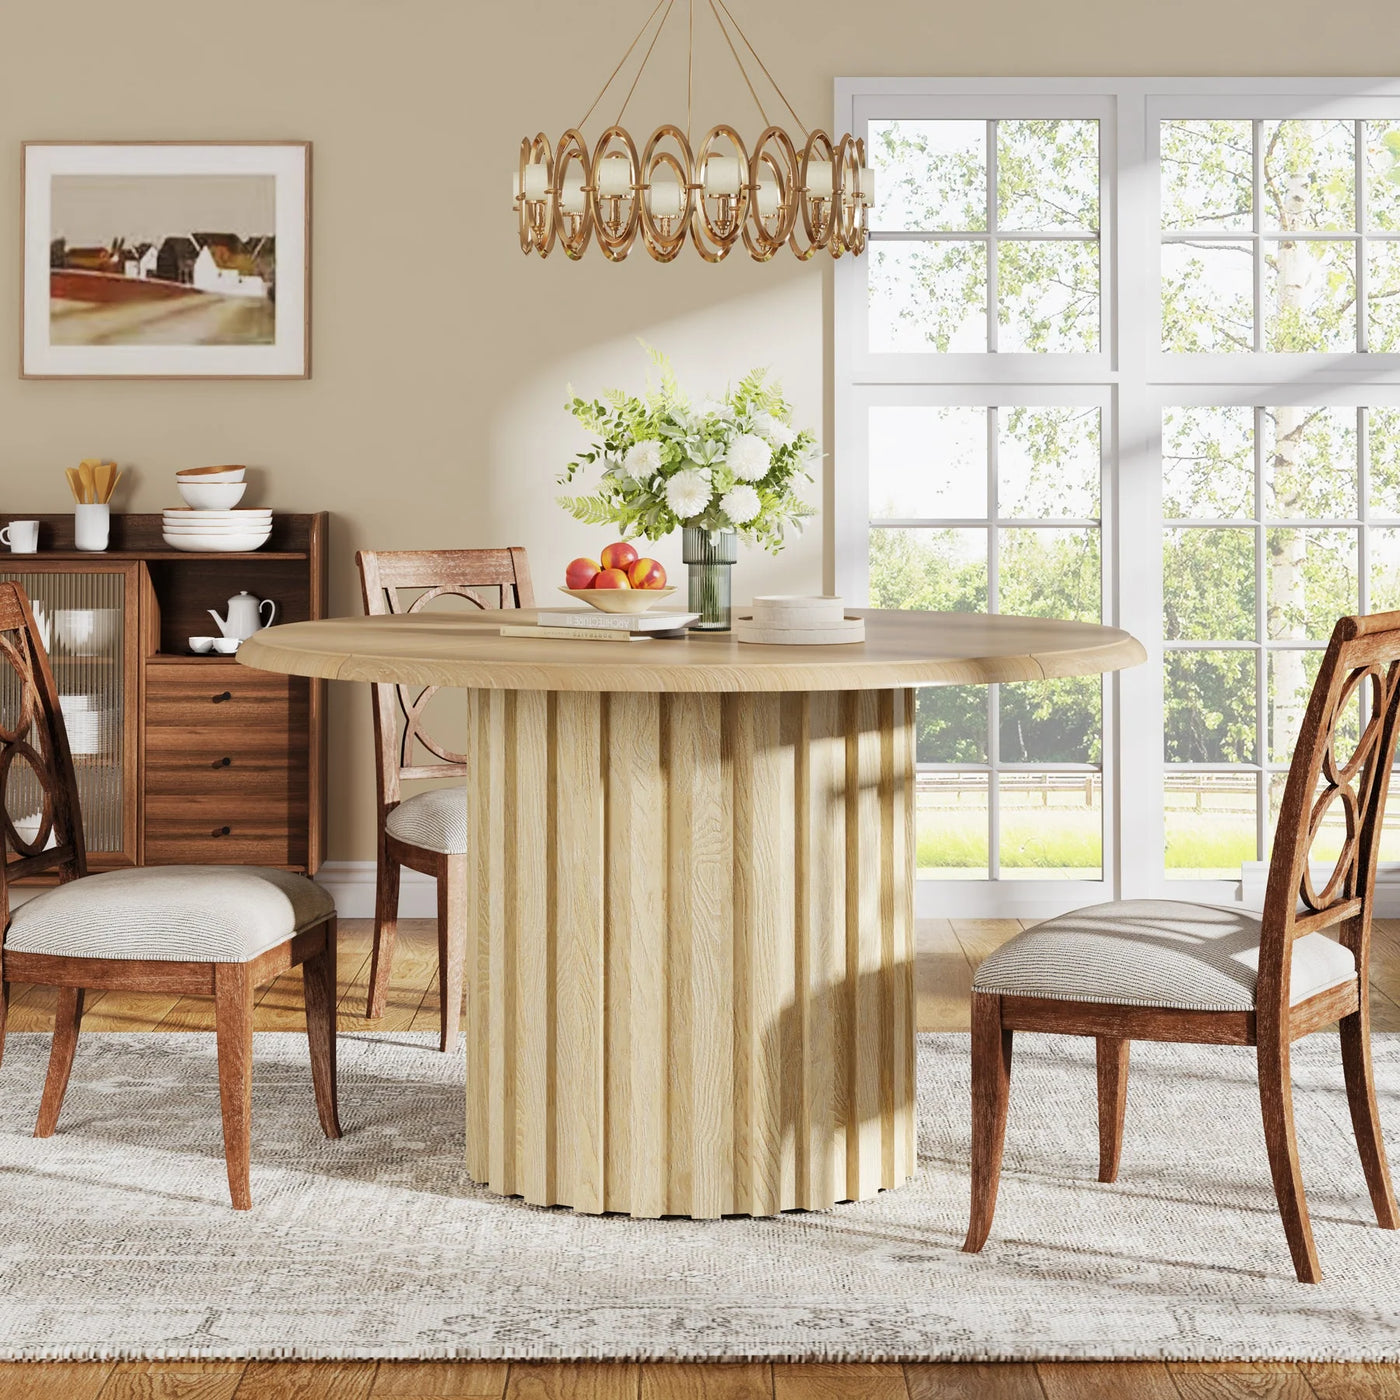 Trebon Round Dining Table | Wooden Oak Farmhouse Kitchen Table with Metal Base for 4